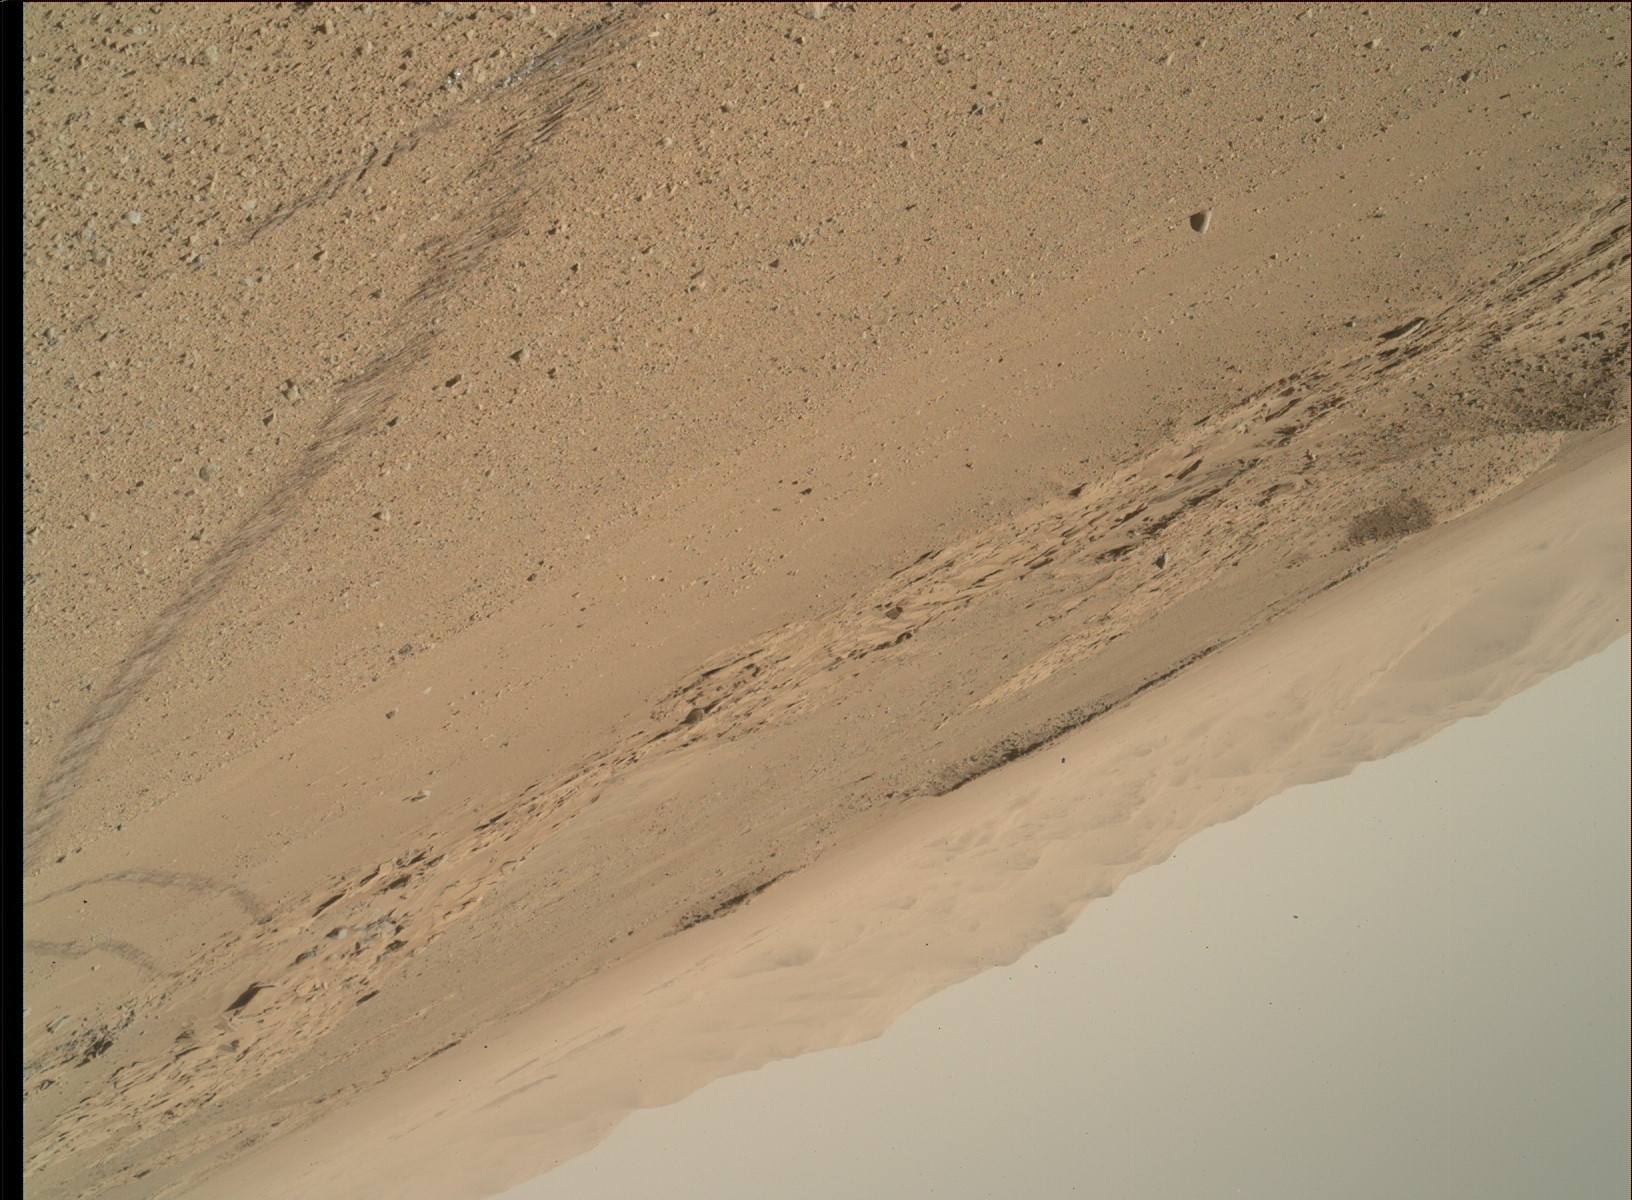 Nasa's Mars rover Curiosity acquired this image using its Mars Hand Lens Imager (MAHLI) on Sol 634